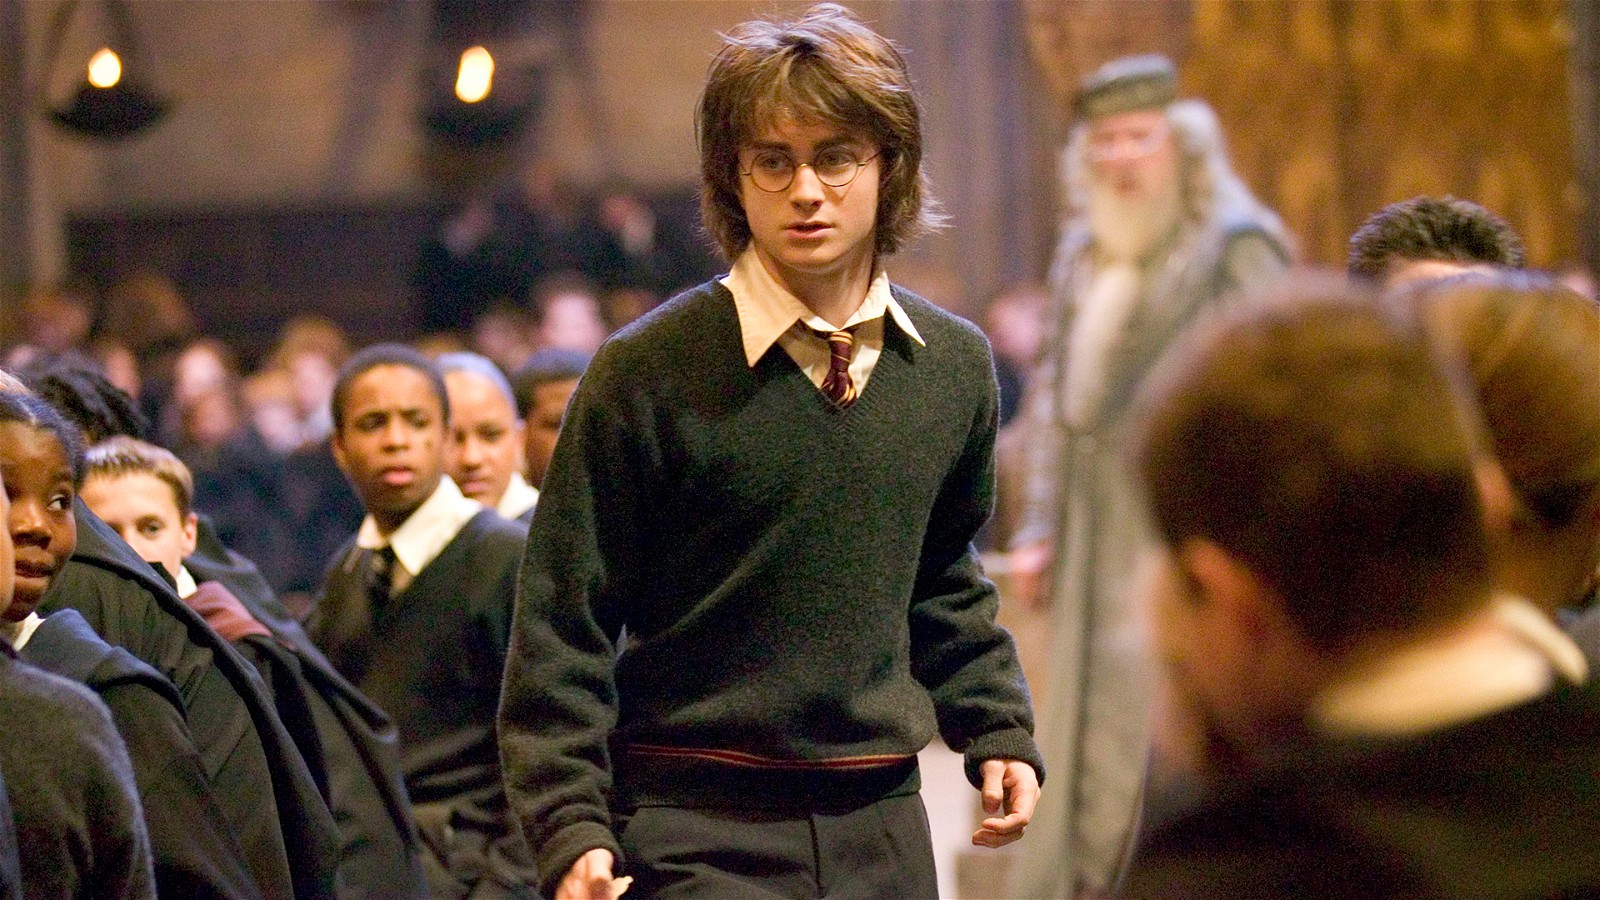 Daniel Radcliffe played an innocent and chastised boy in Harry Potter